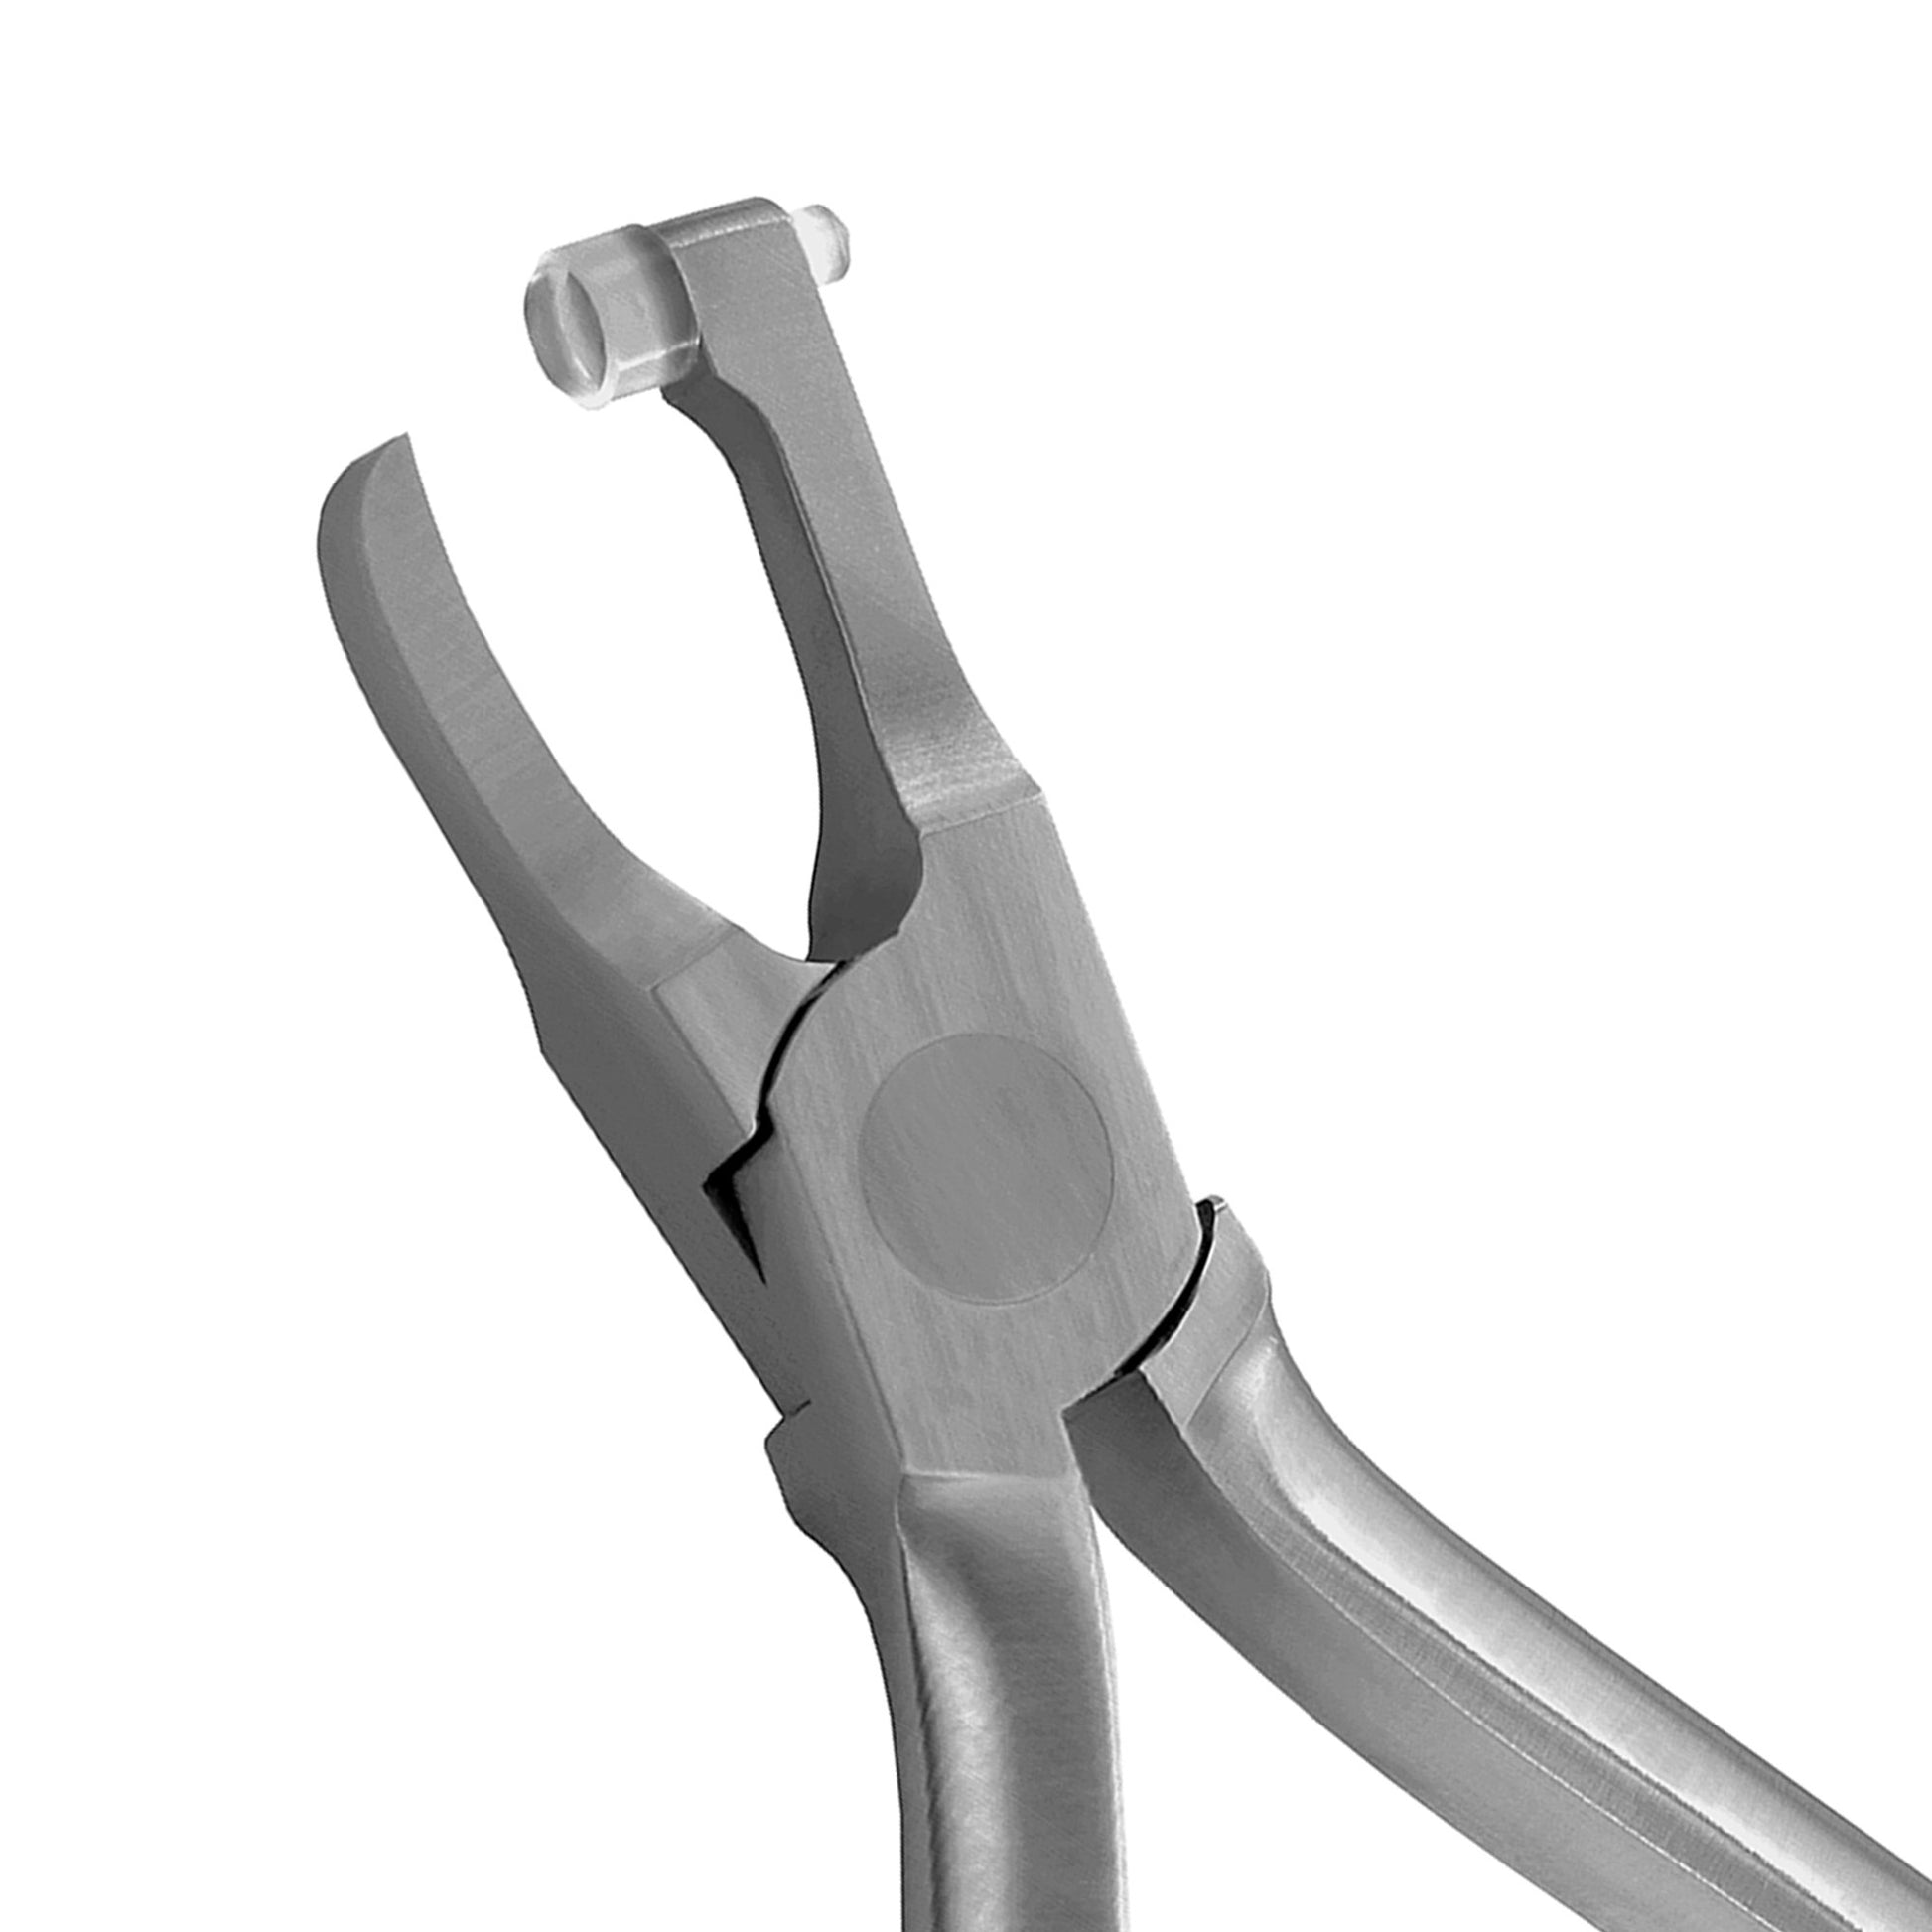 Ortho Pliers Band remover posterior, long